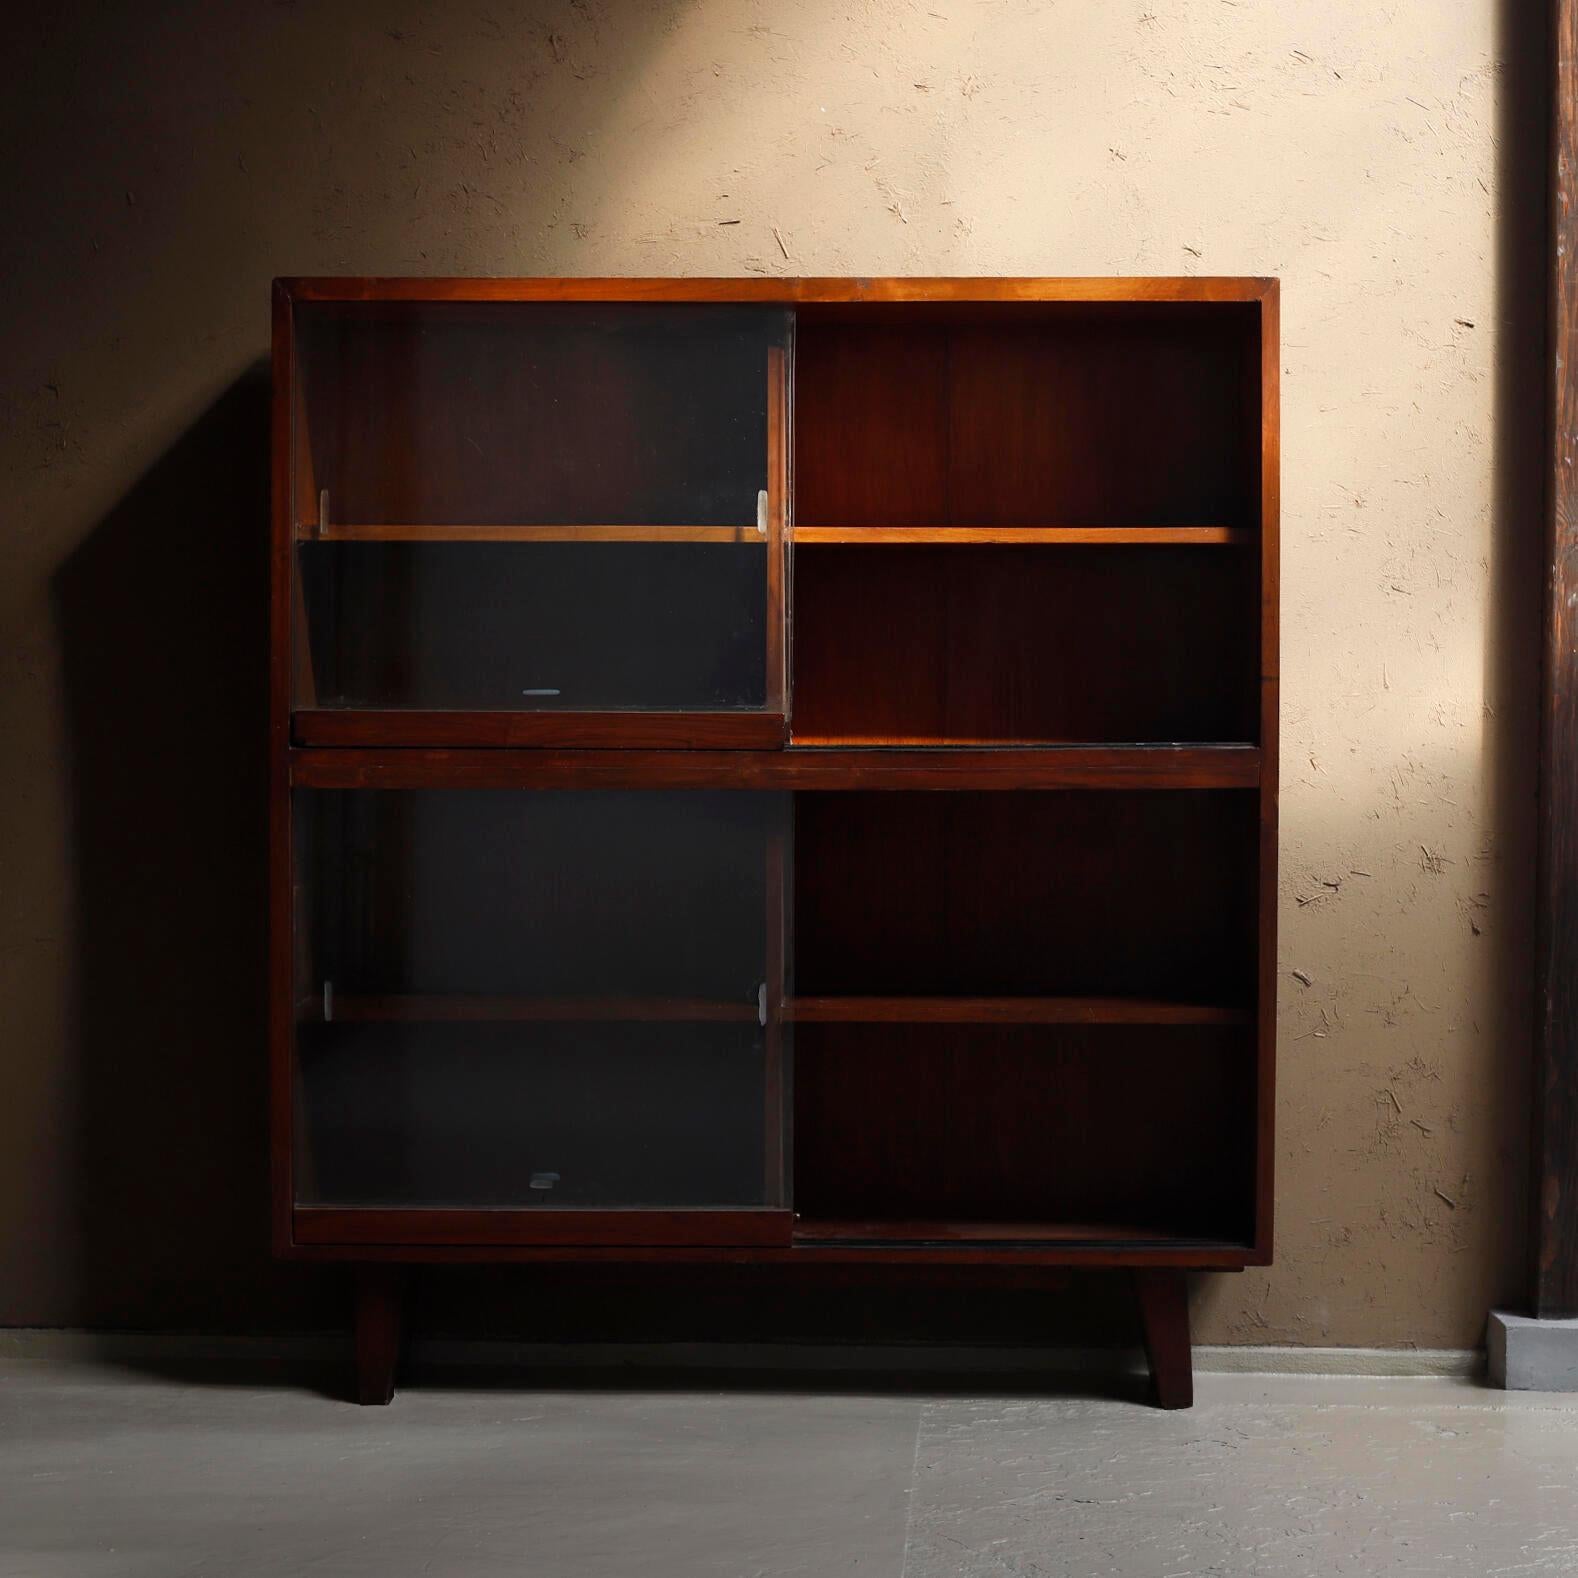 Teak glass fronted bookcase designed by Pierre Jeanneret for Chandigarh.
Thick teak solid wood shelves inside.
The glass sliding doors on the bottom are alterations to the original ones.

Provenance: Administrative buildings, Chandigarh, India